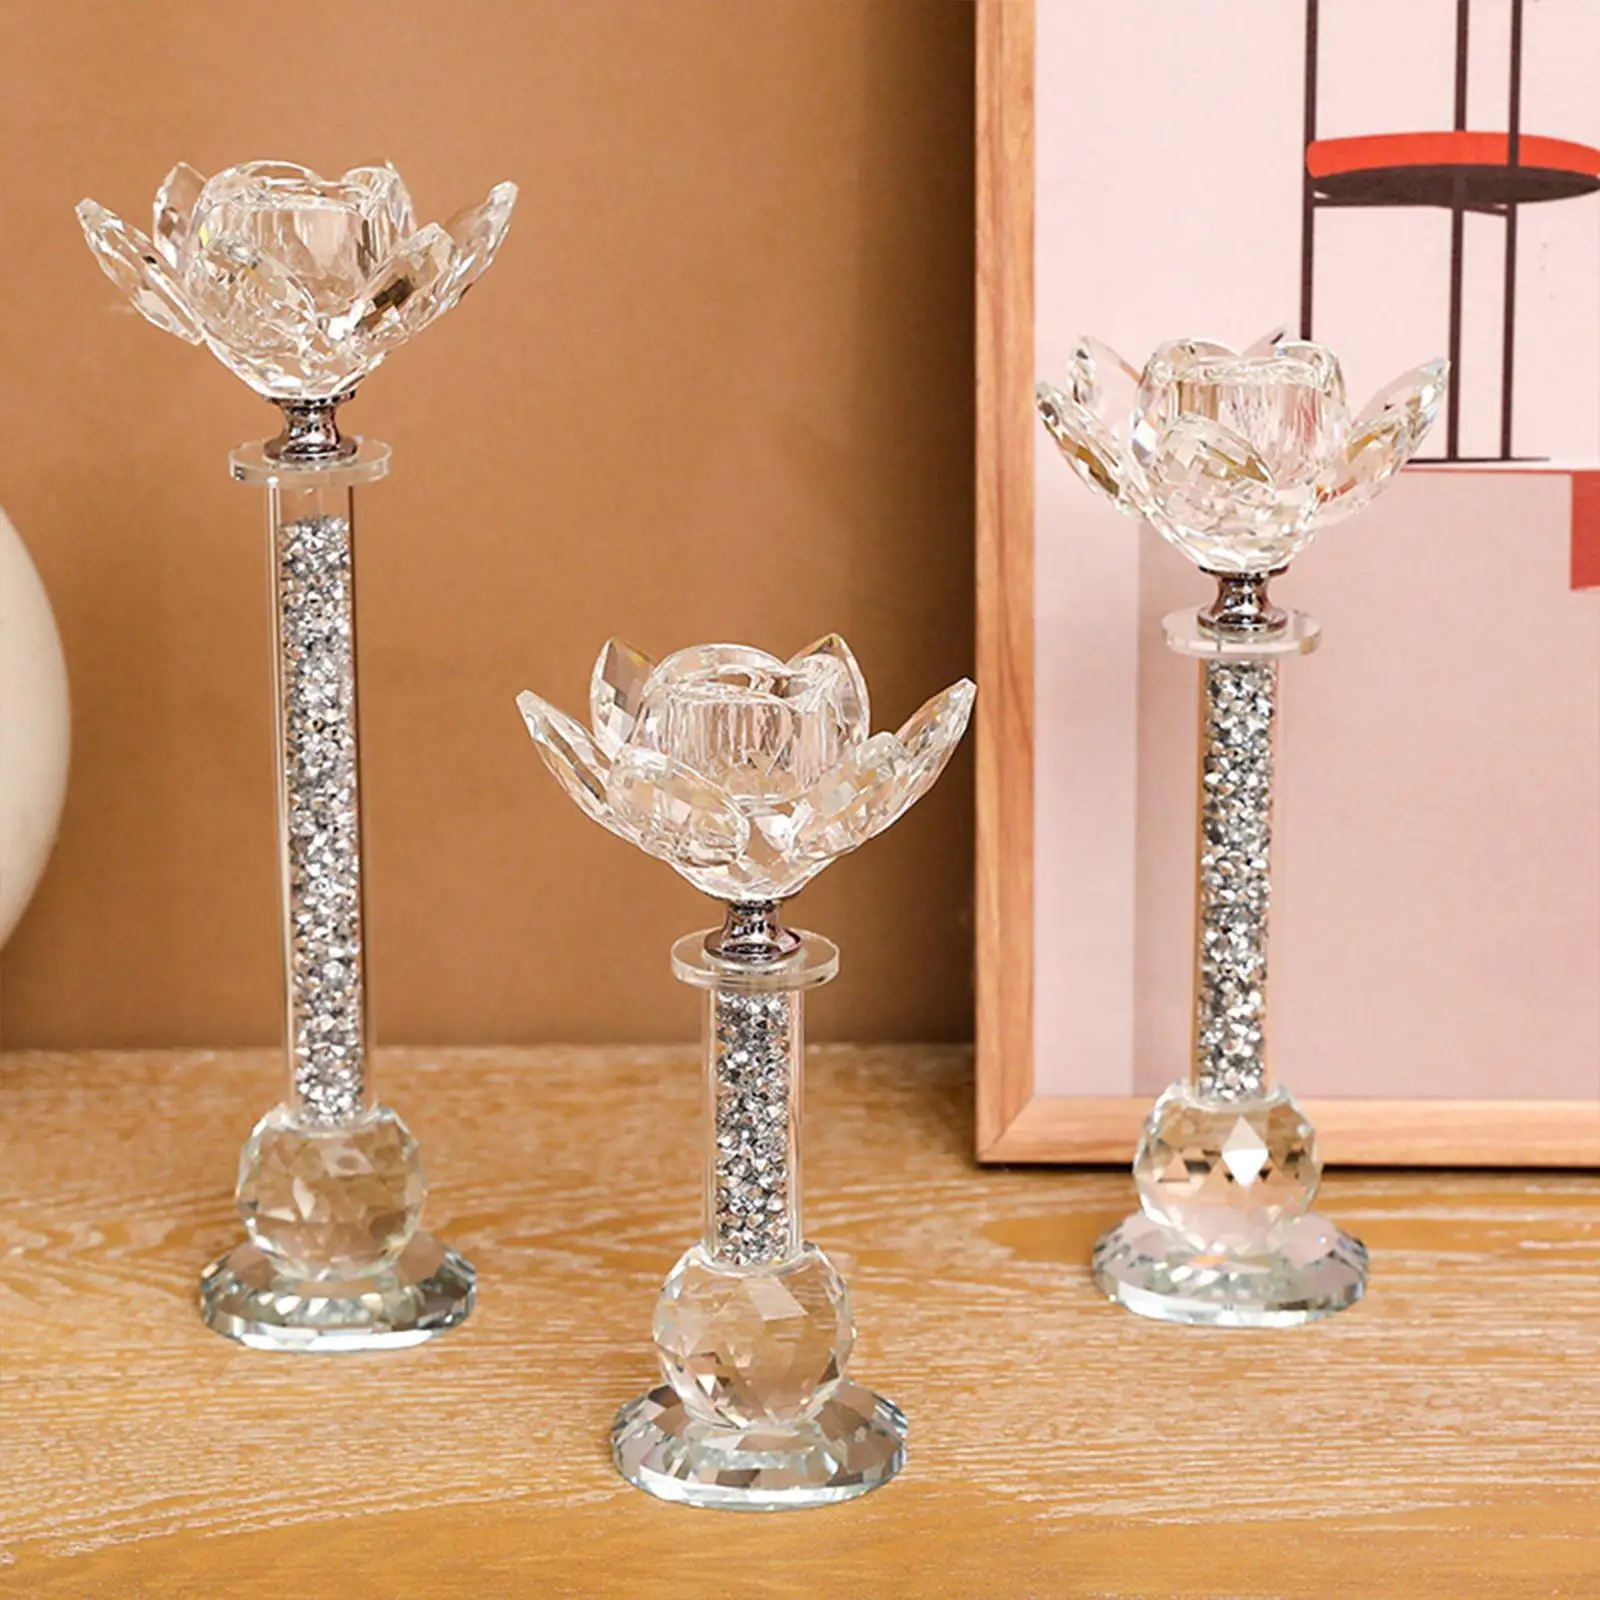 3Pcs Taper Candle Holder Candlestick Elegant Decorative Candle Stand for Home Banquet Table Centerpiece Dining Room Decor